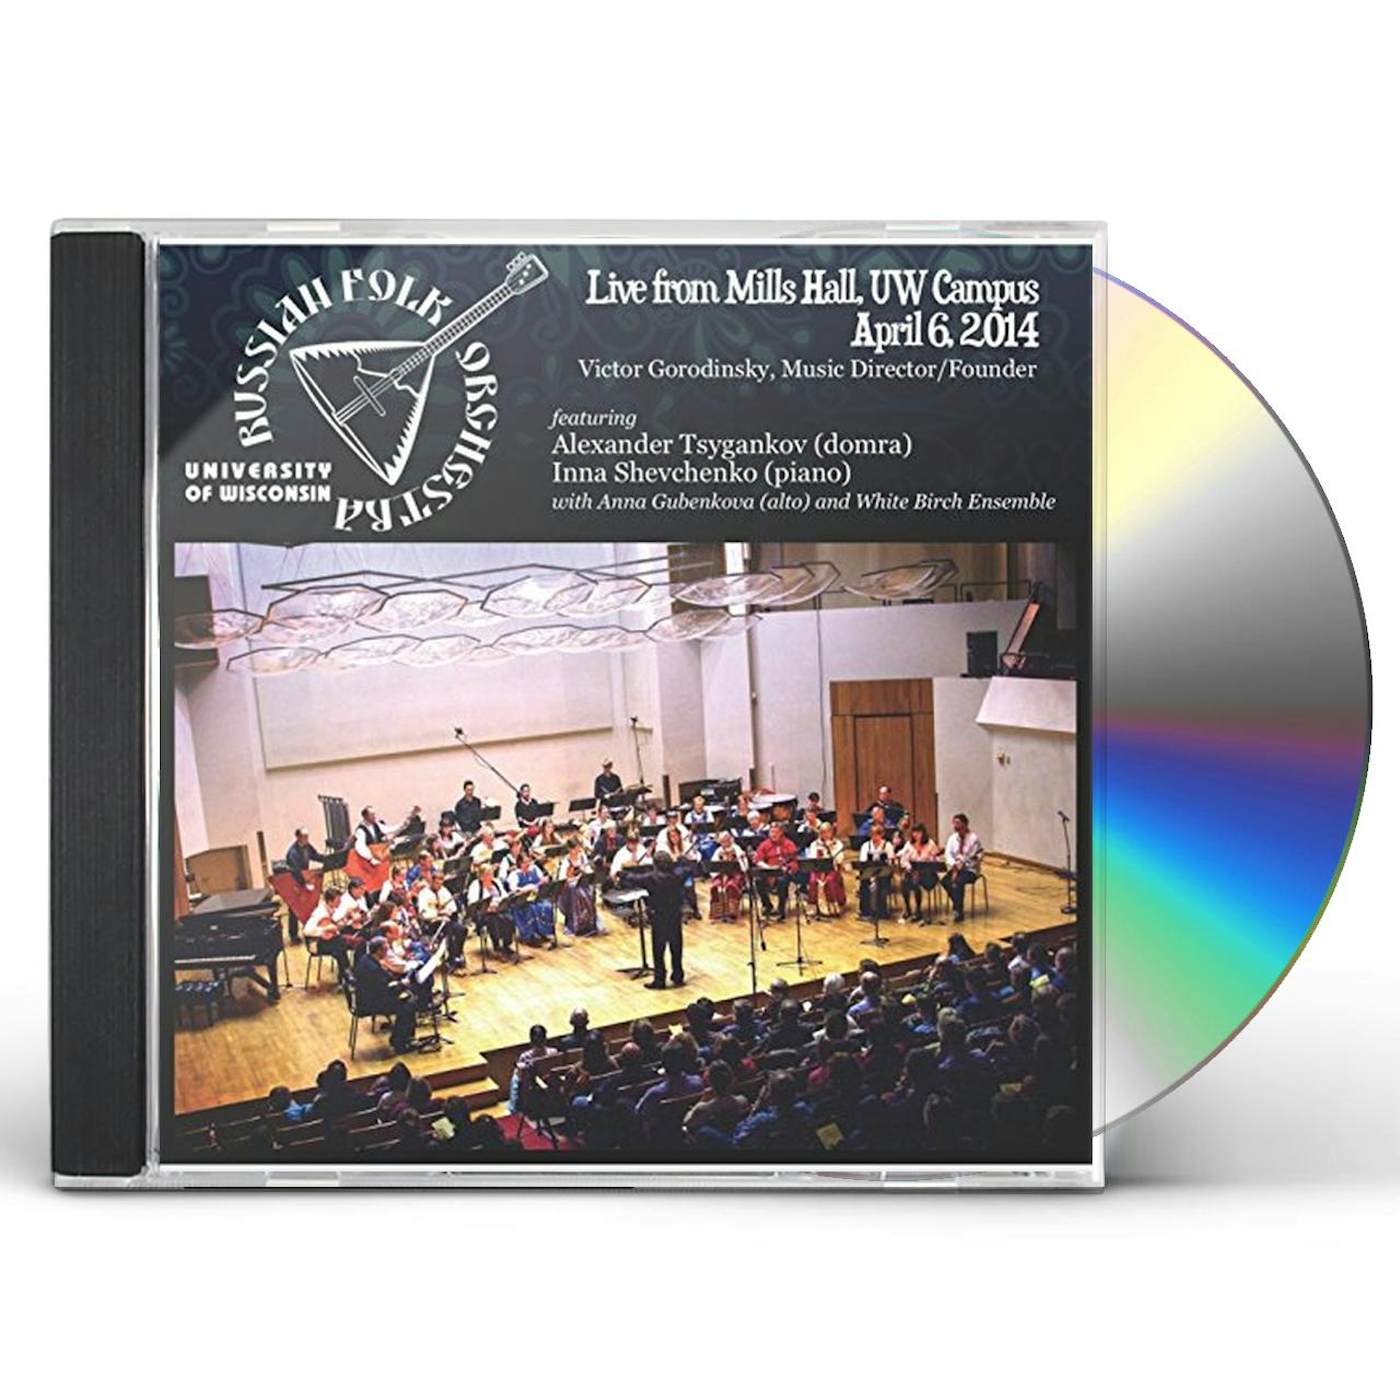 University Of Wisconsin Russian Folk Orchestra LIVE FROM MILLS HALL UW CAMPUS APRIL 6 2014 CD